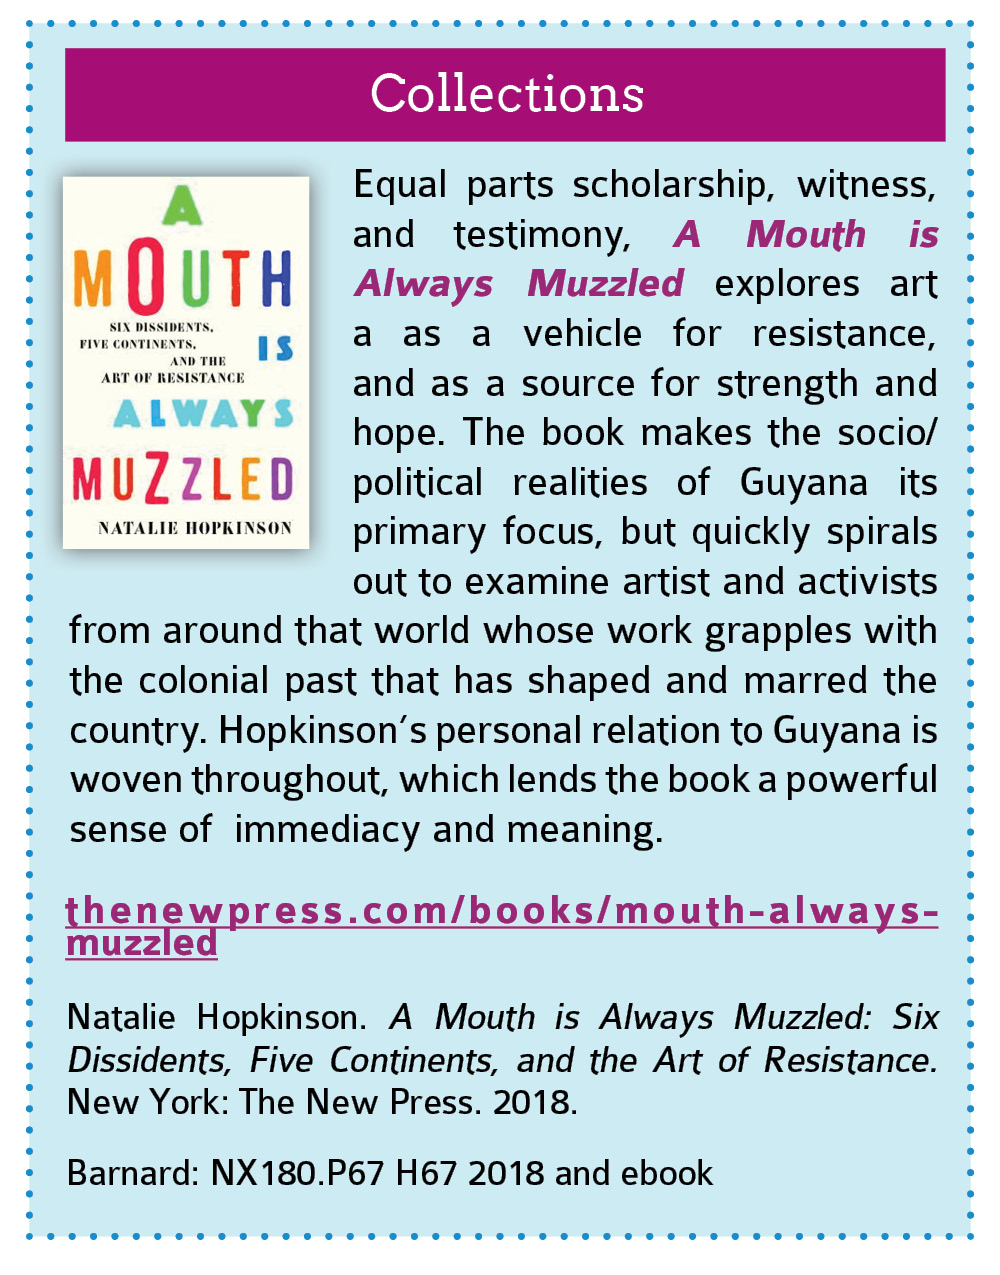 Collections:  Equal parts scholarship, witness, and testimony, A Mouth is Always Muzzled explores art a as a vehicle for resistance, and as a source for strength and hope. The book makes the socio/political realities of Guyana its primary focus, but quickly spirals out to examine artist and activists from around that world whose work grapples with the colonial past that has shaped and marred the country. Hopkinson’s personal relation to Guyana is woven throughout, which lends the book a powerful sense of  immediacy and meaning.   thenewpress.com/books/mouth-always-muzzled  Natalie Hopkinson. A Mouth is Always Muzzled: Six Dissidents, Five Continents, and the Art of Resistance. New York: The New Press. 2018.  Barnard: NX180.P67 H67 2018 and ebook. Click this link to open the Columbia CLIO listing for this book in a new tab.